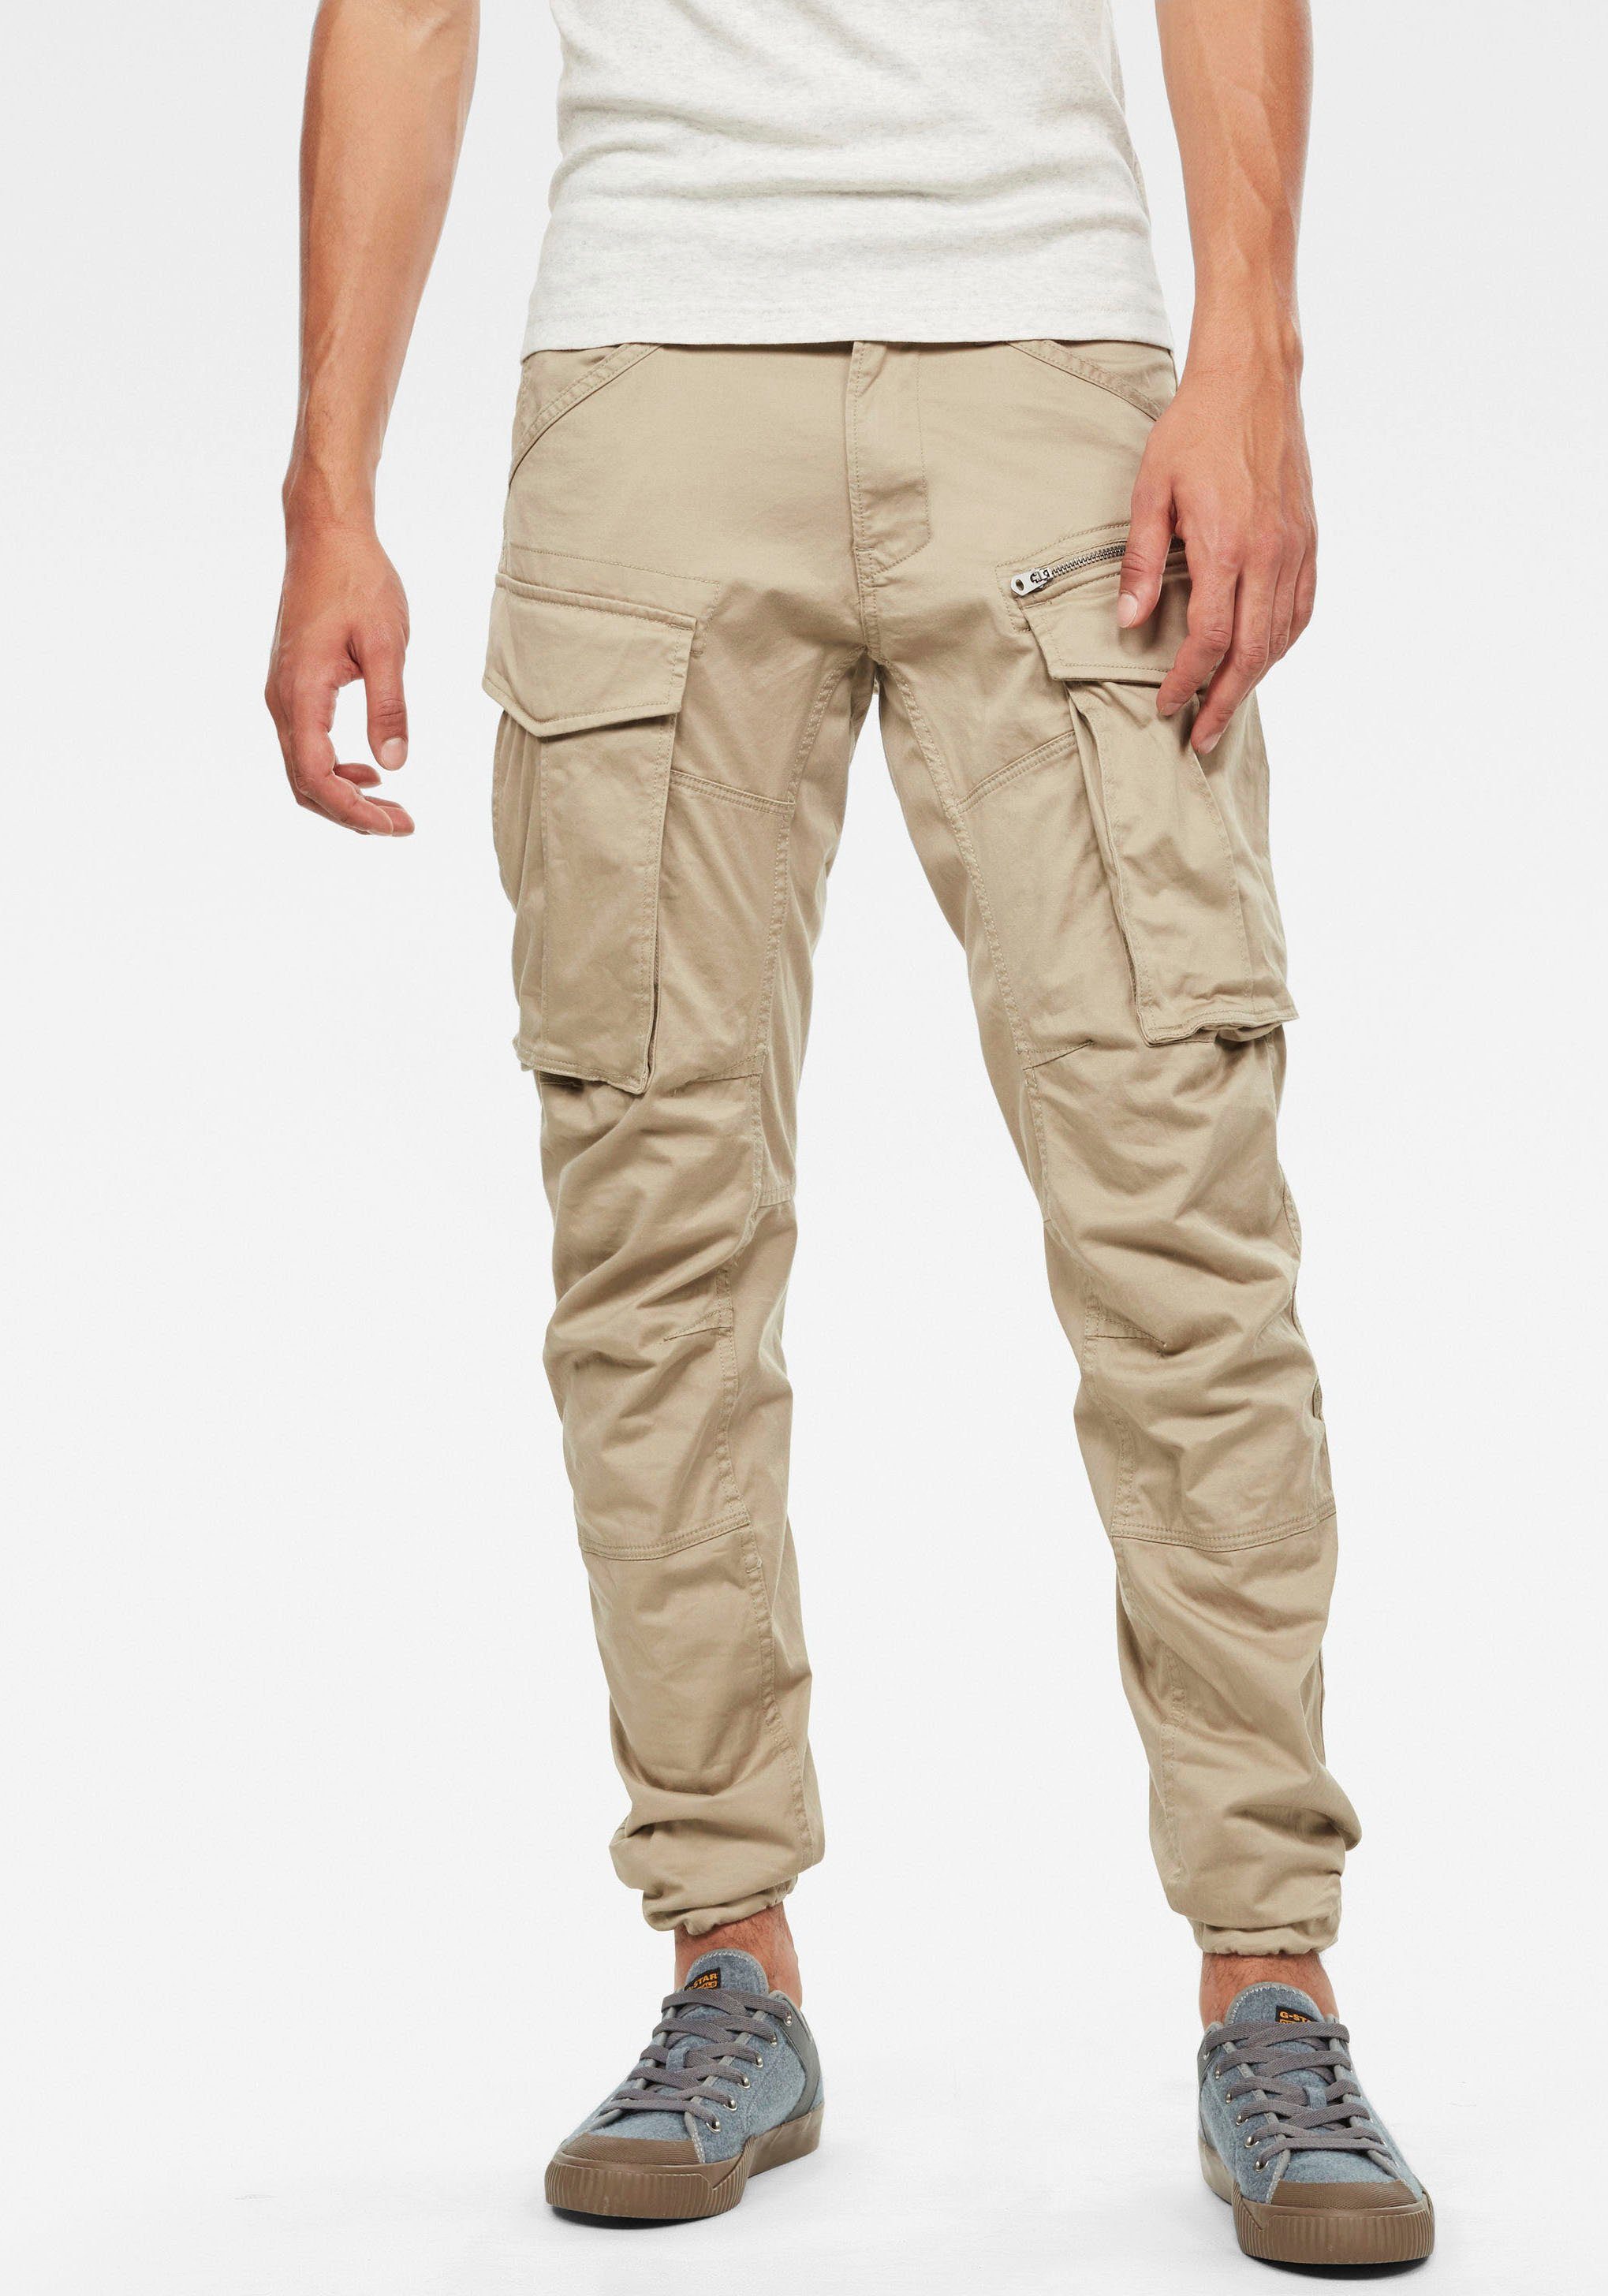 G-Star RAW Cargohose Rovic Zip 3D Tapered Pant beige